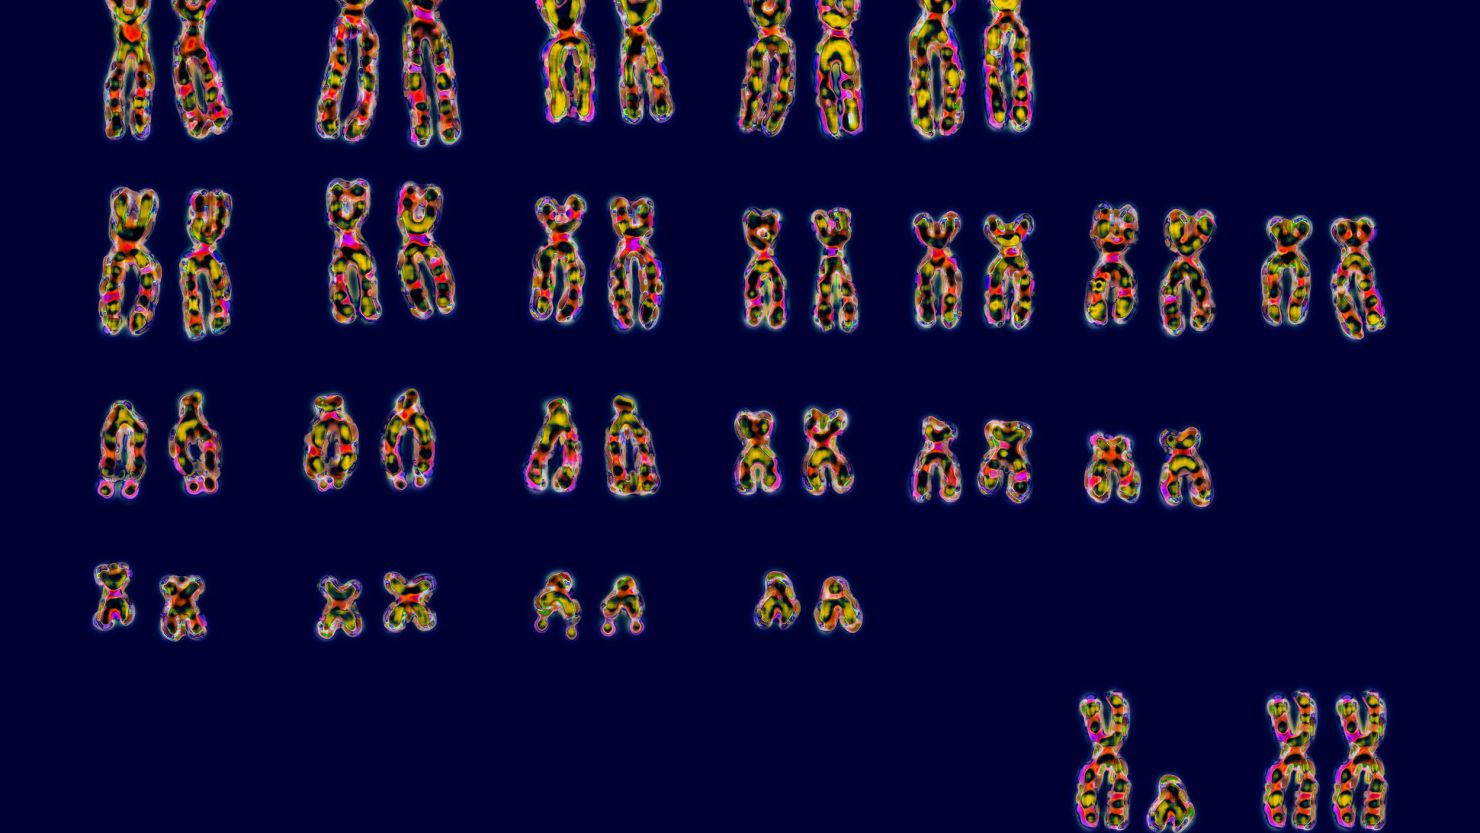 Humans have 23 pairs of chromosomes. At bottom right are the pairs of sex chromosomes XY or XX that determine sex.